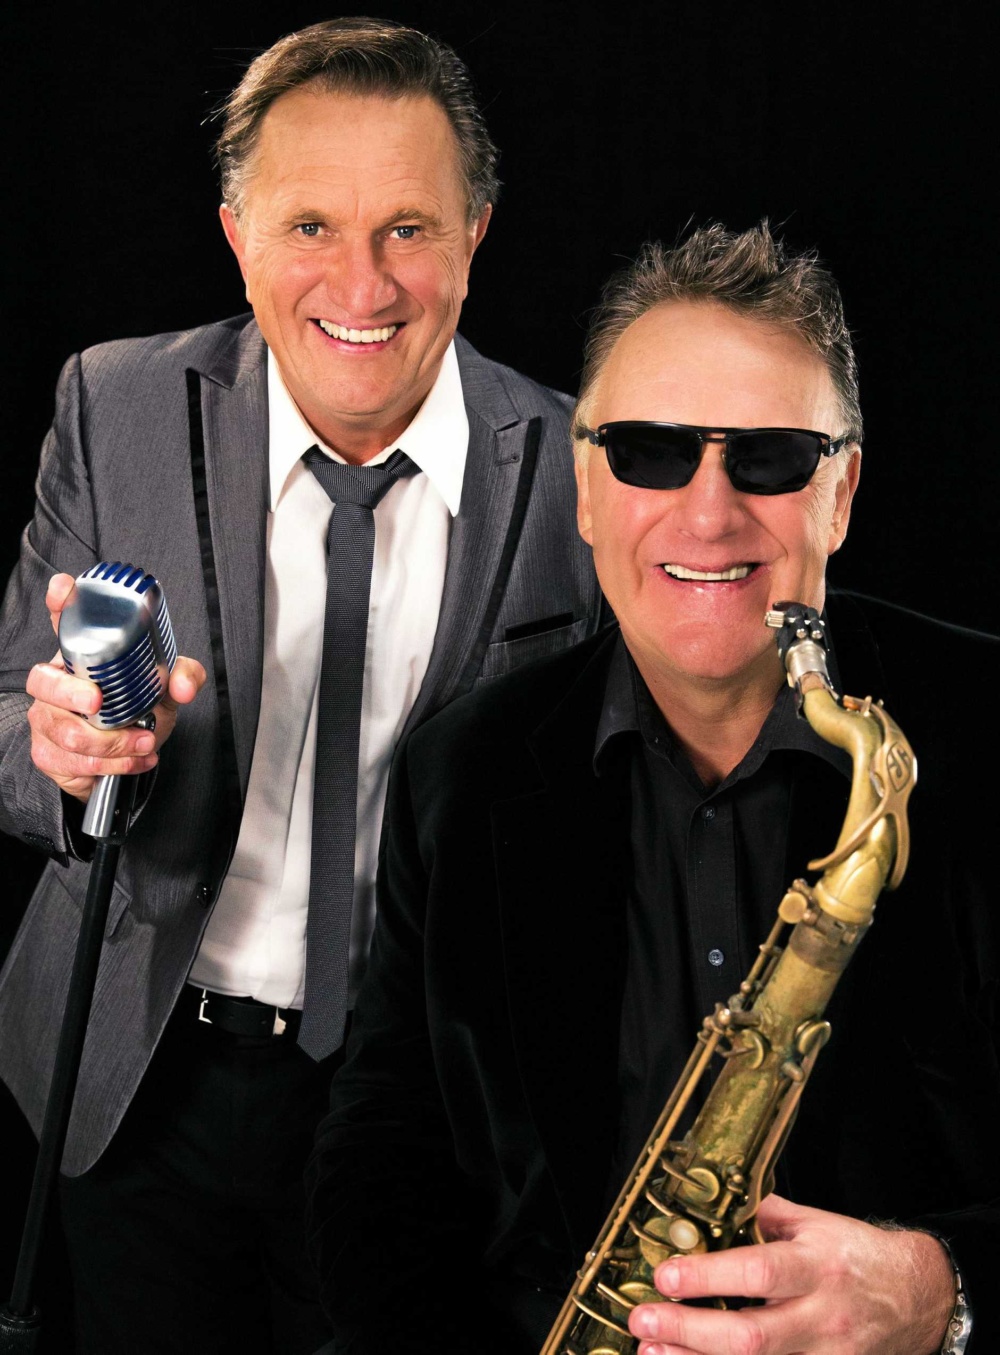 ON THE PROWL! Frankie J Holden & Wilbur Wilde, & The '55 Band - Exclusive Dinner & Show